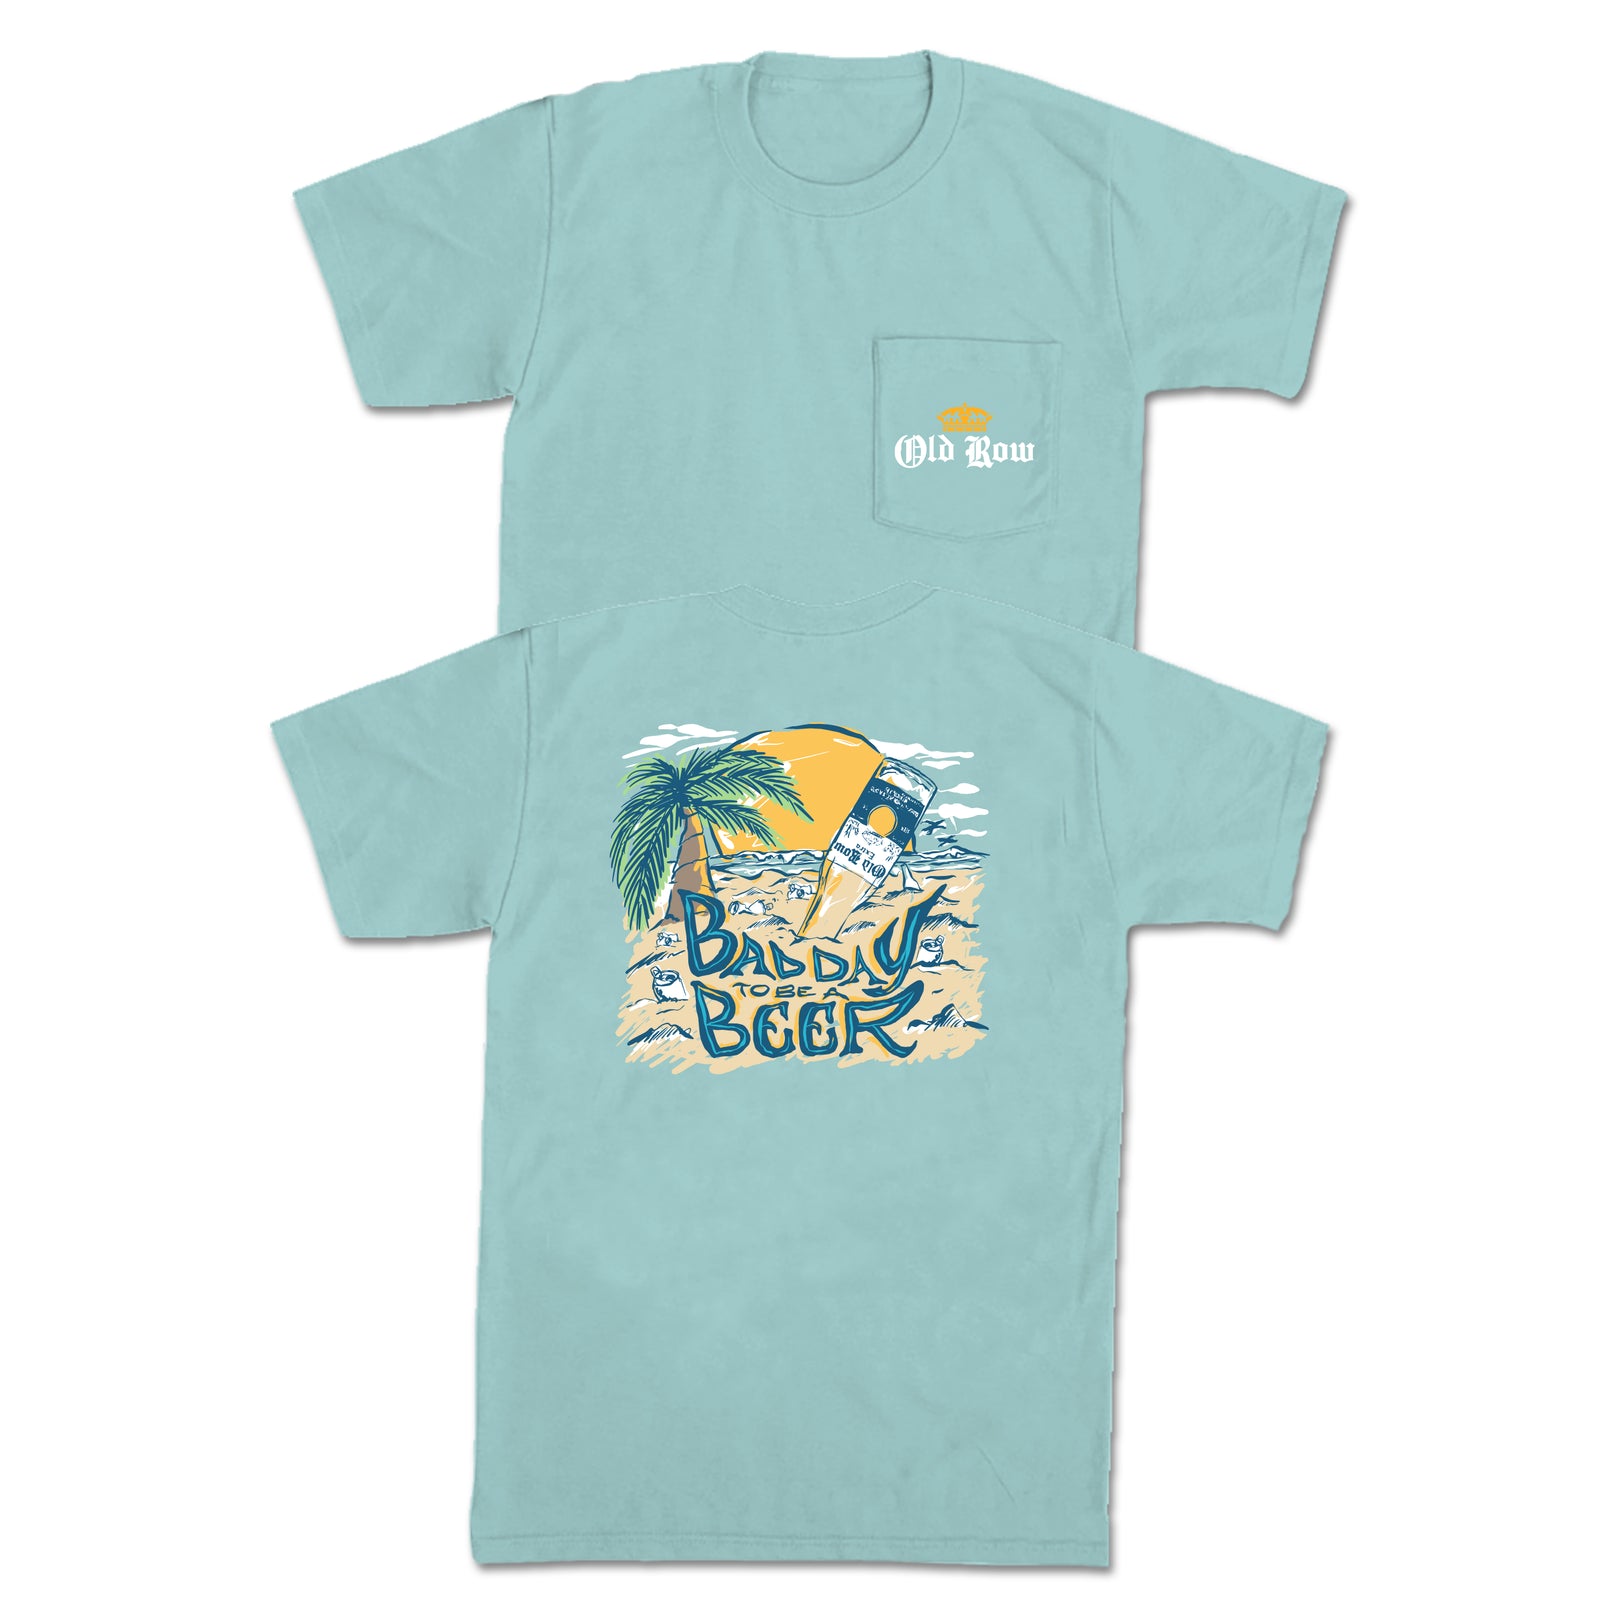 Bad Day To Be A Beer Beach Pocket Tee